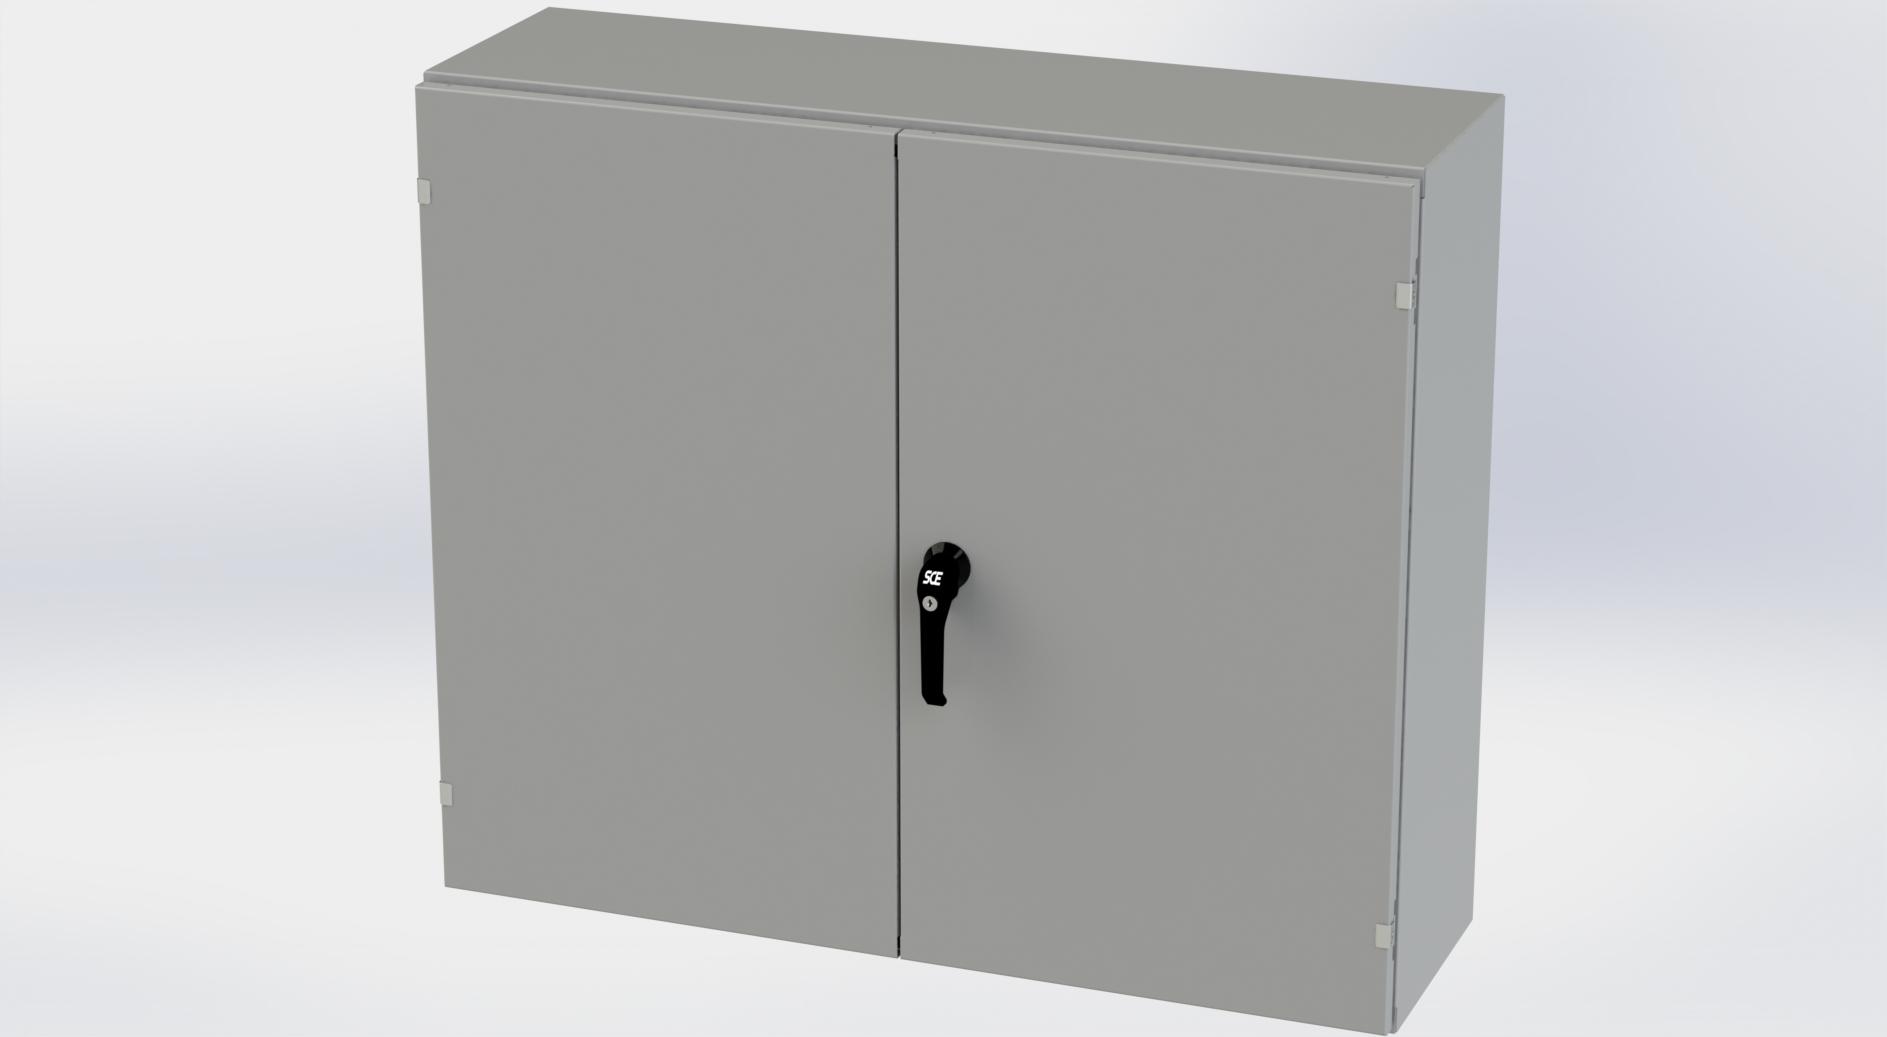 Saginaw Control SCE-364212WFLP WFLP Enclosure, Height:36.00", Width:42.00", Depth:12.00", ANSI-61 gray powder coating inside and out.